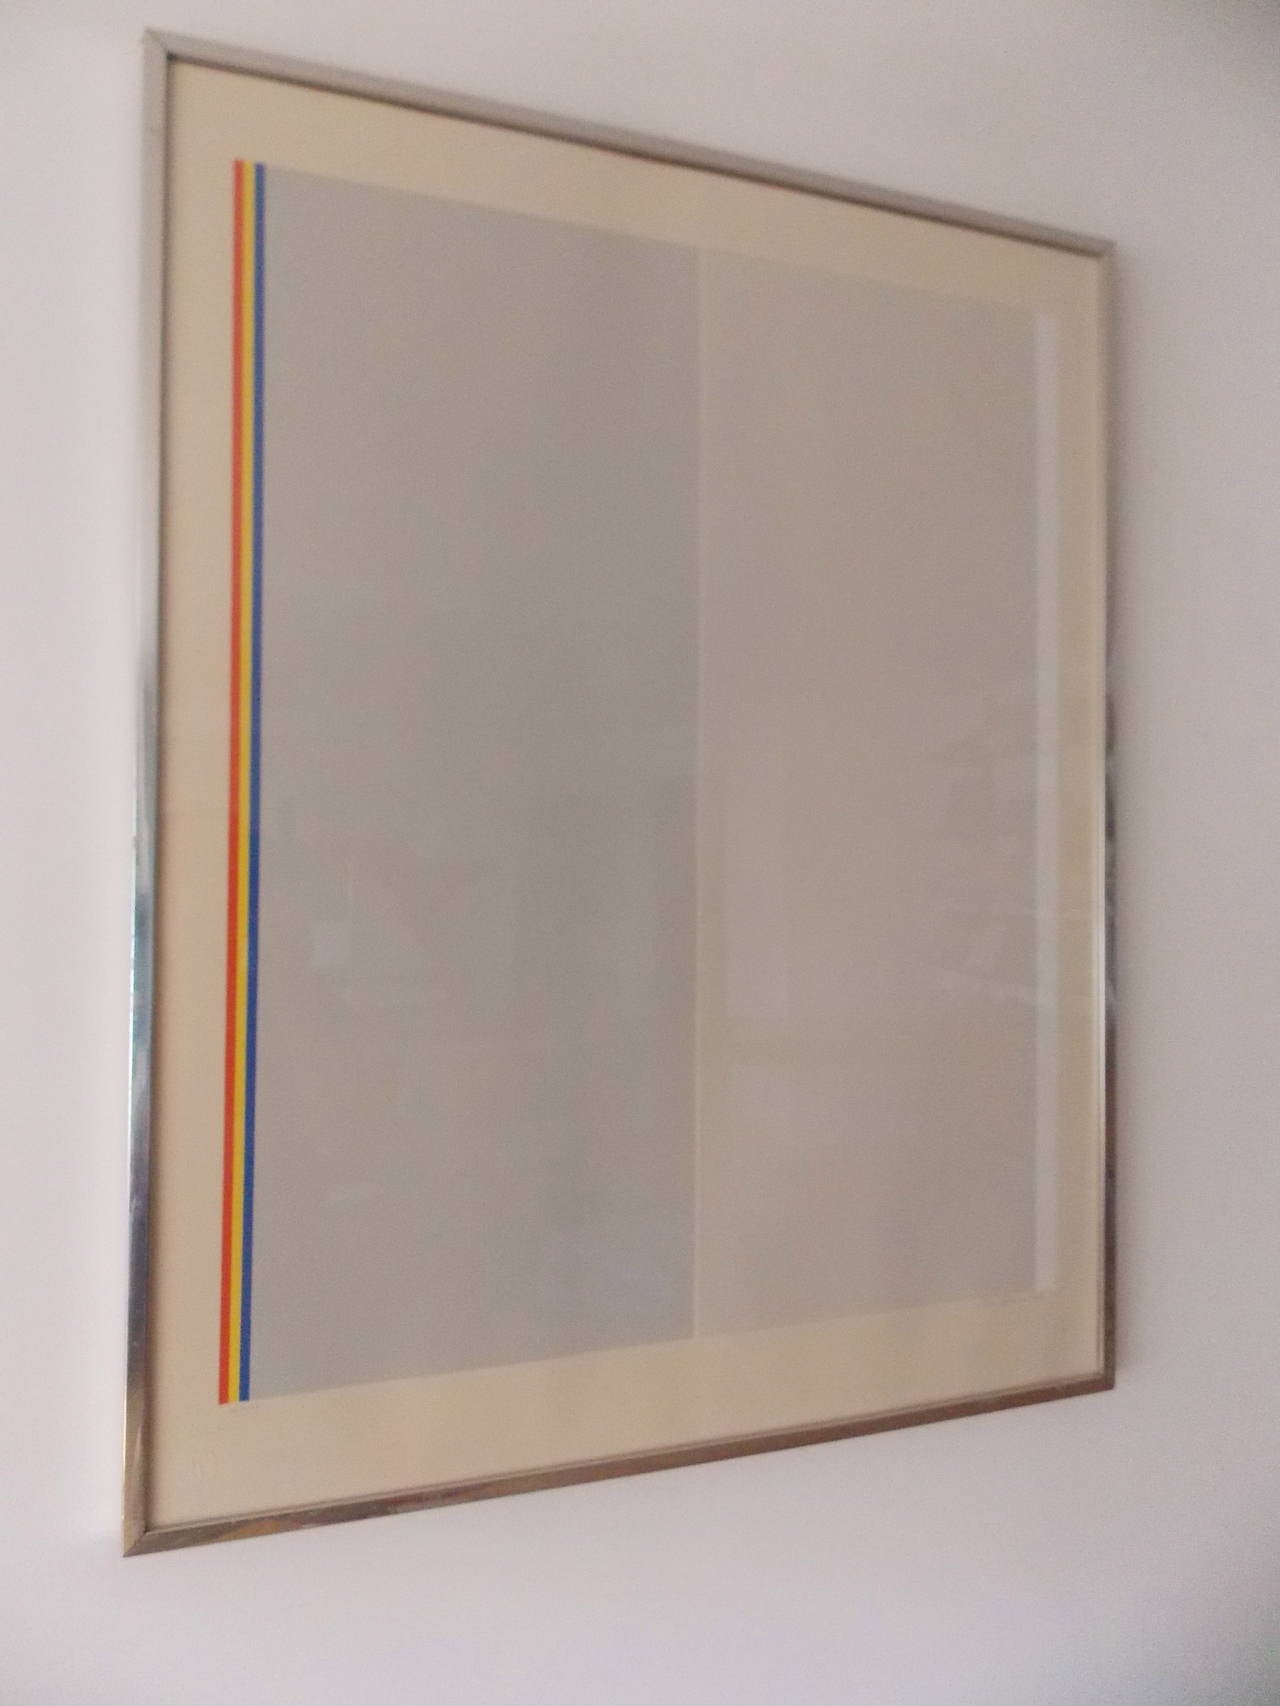 1920-1985.
Ink on paper,  in the original aluminum frame under glass. 
The frame shows ware.
The print has not been taken out of the frame.
The artist did this piece as a homage to Barnett Newman.
Signed in pencil.
 